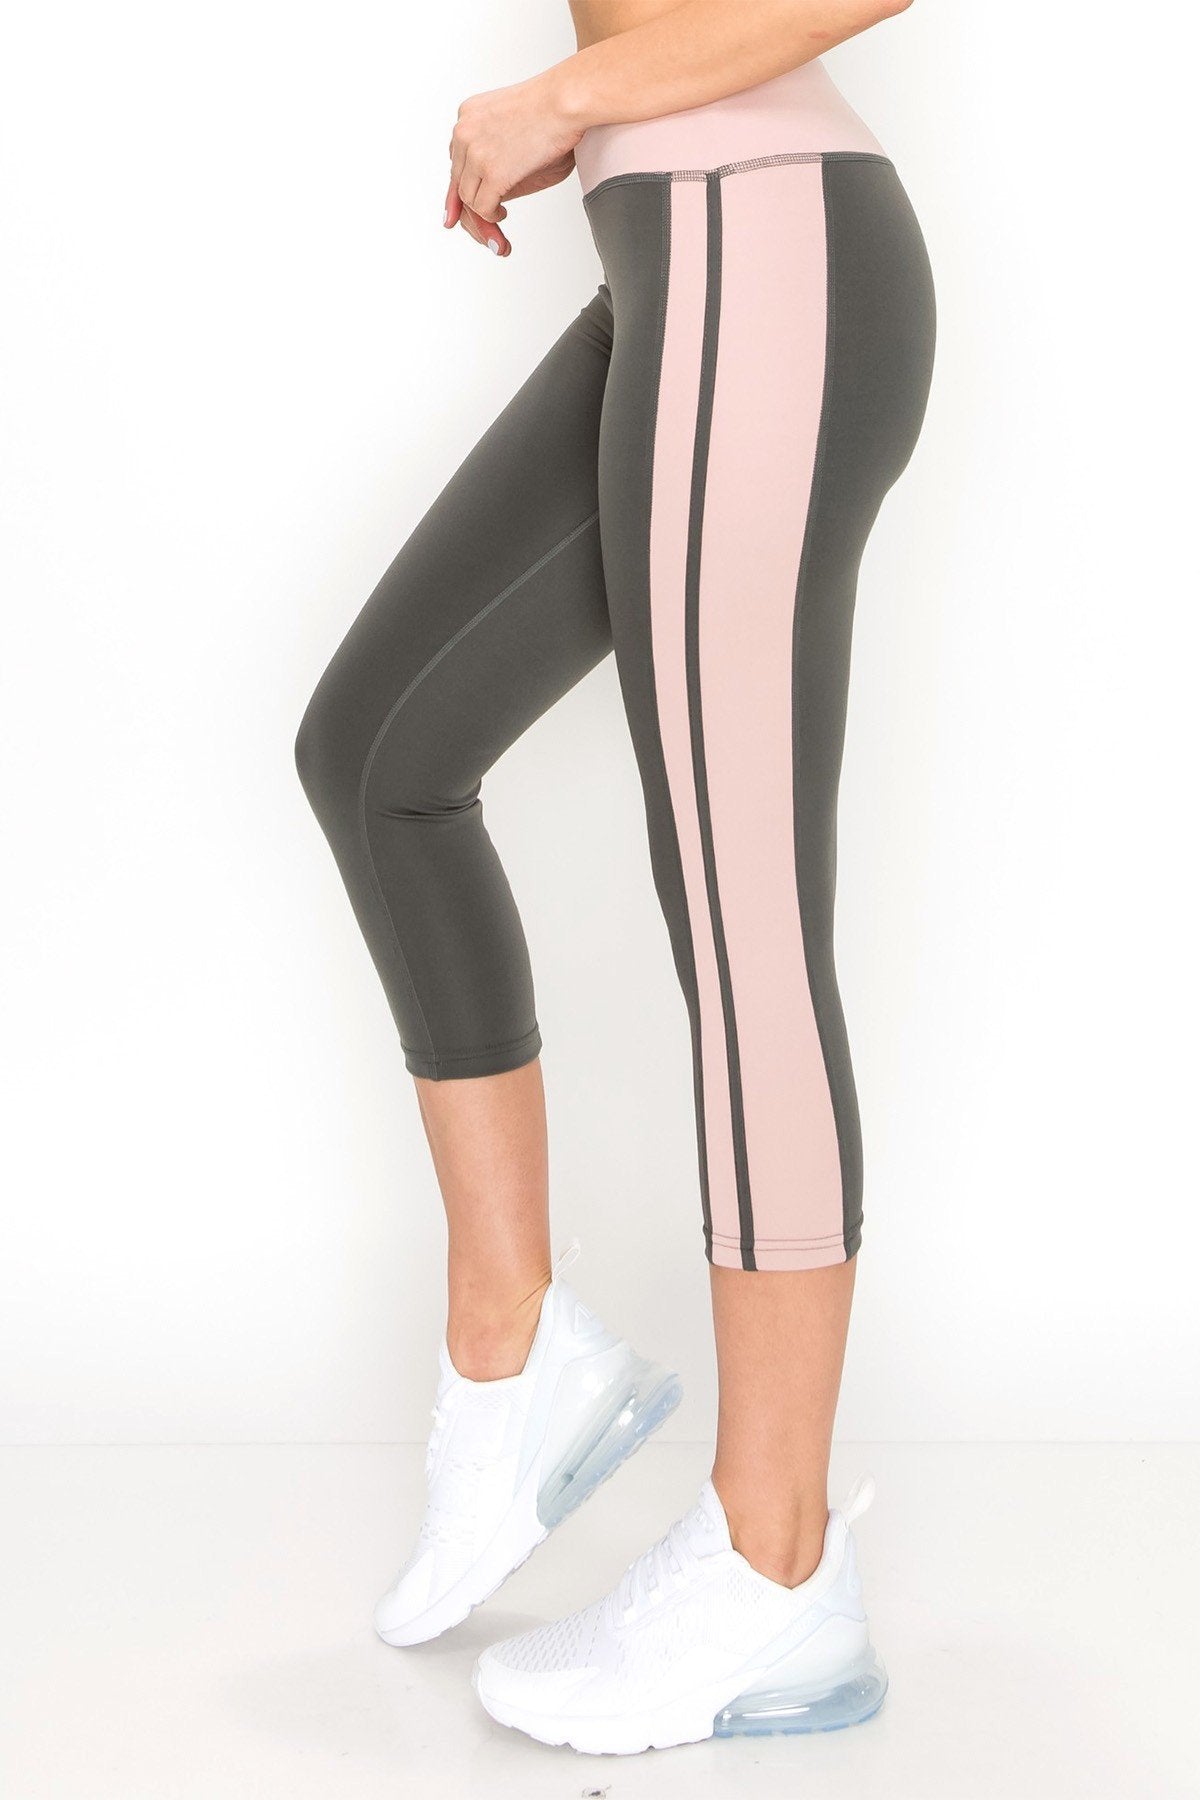 Degree of Pink Active Leggings Clothing Fair Shade S Grey 95% poly 5% spandex